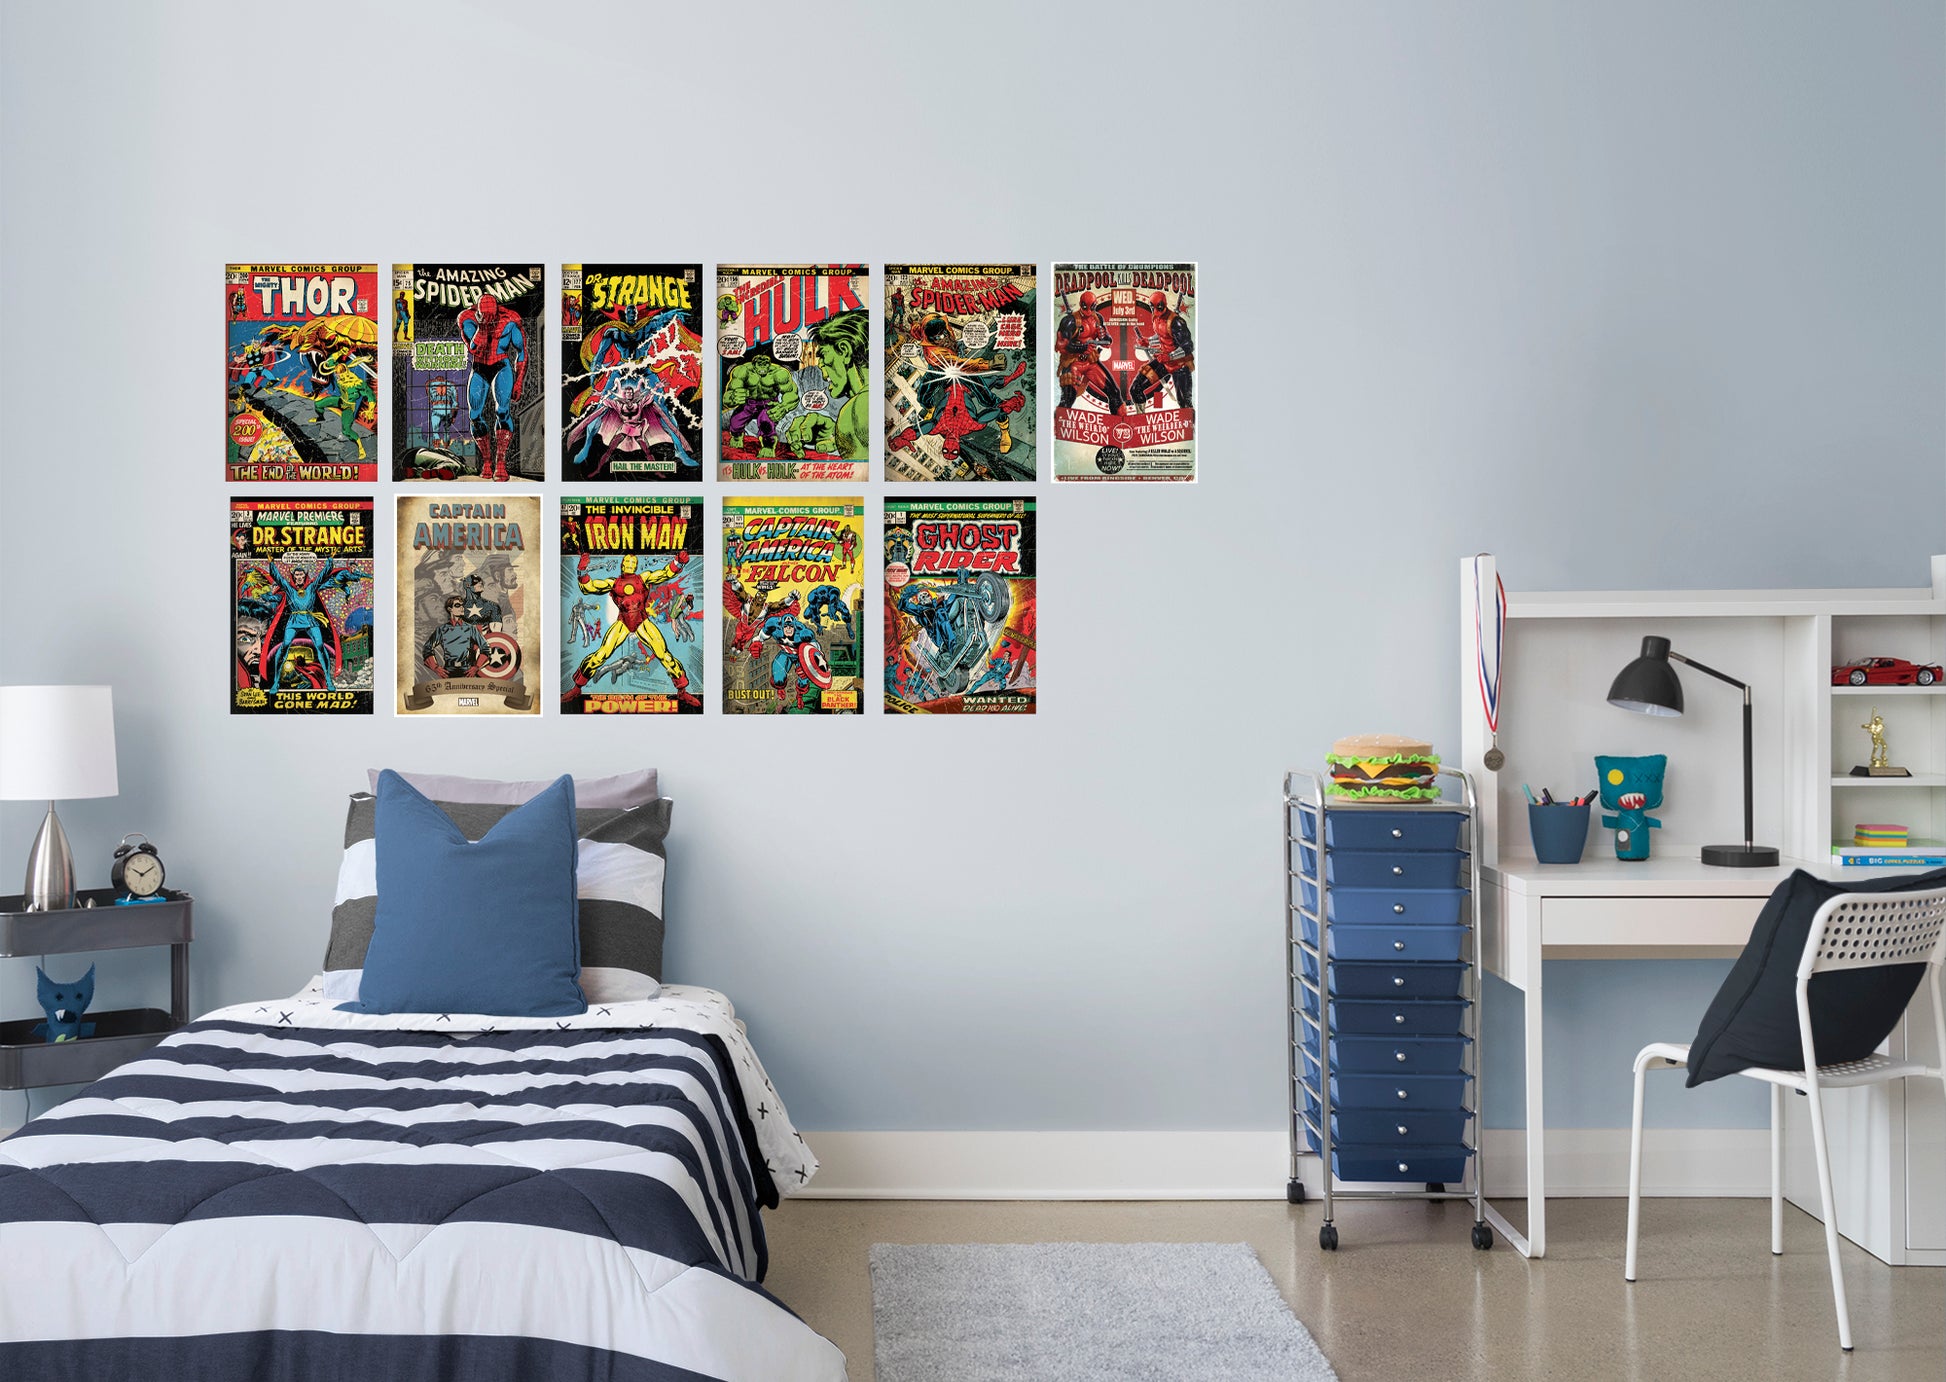 comics design printed in several products - Comics Design in Home Decor Products: Posters, Wall Art, and Decals